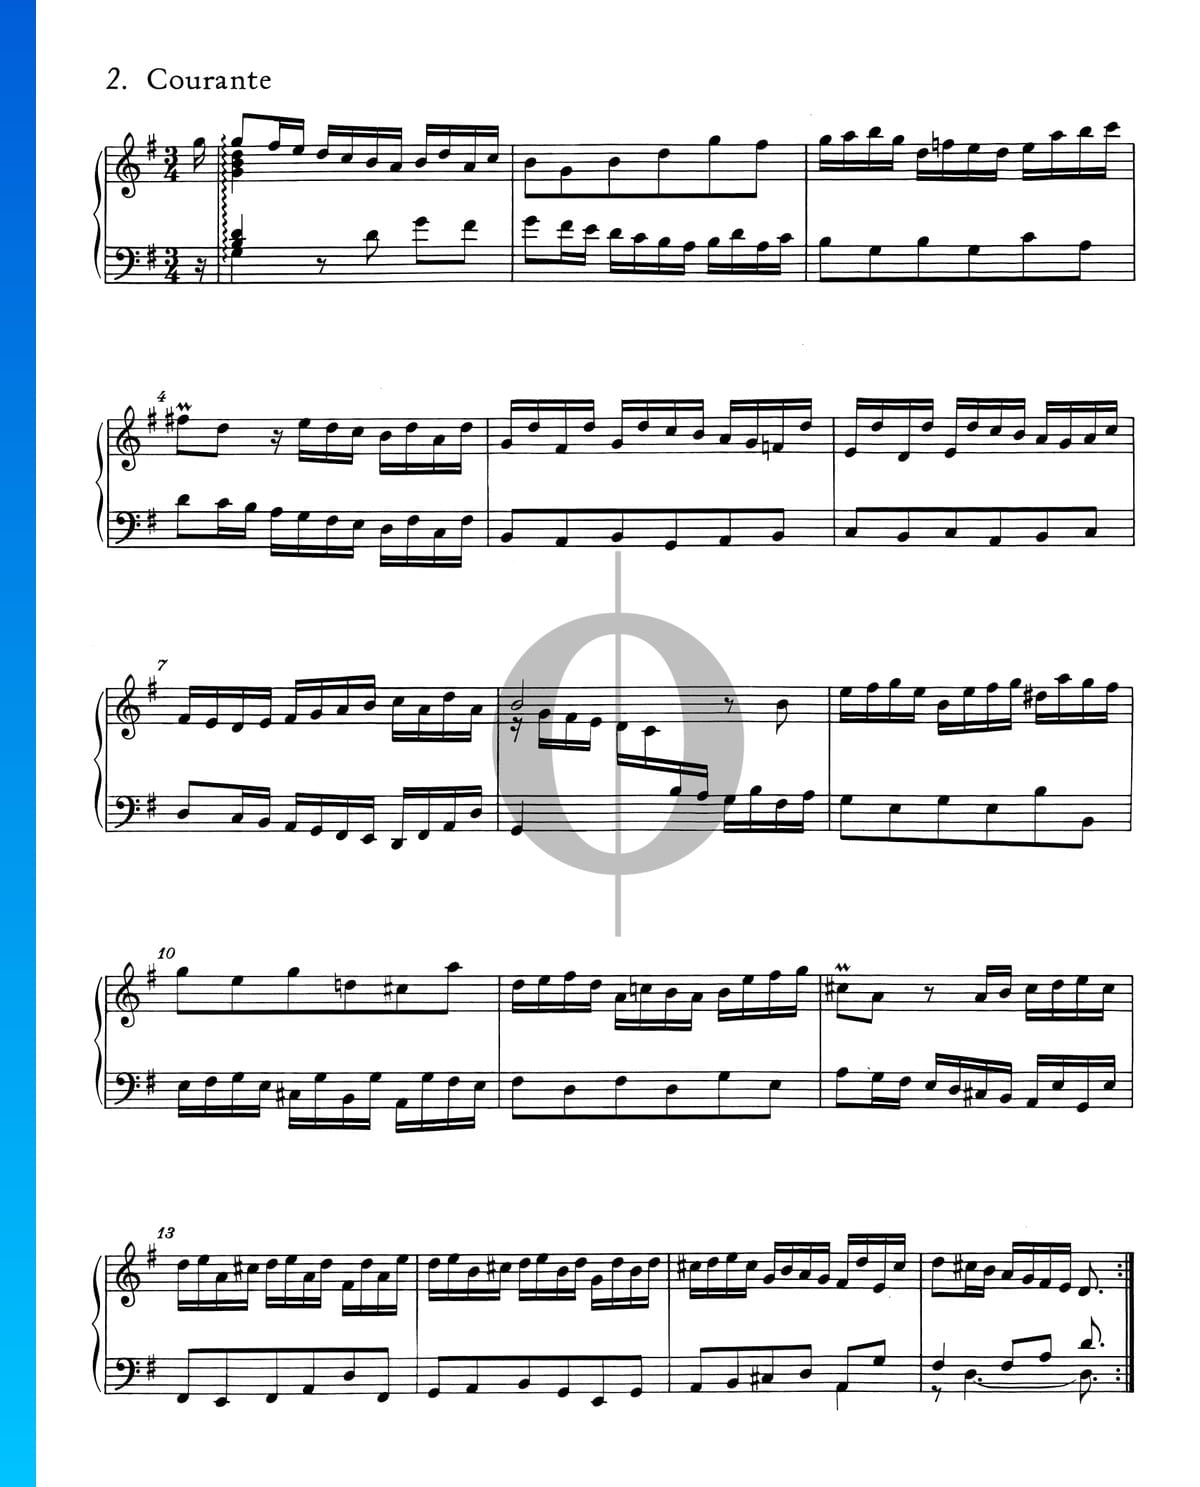 French Suite No. 5 G Major, BWV 816: 2. Courante Sheet Music (Piano ...